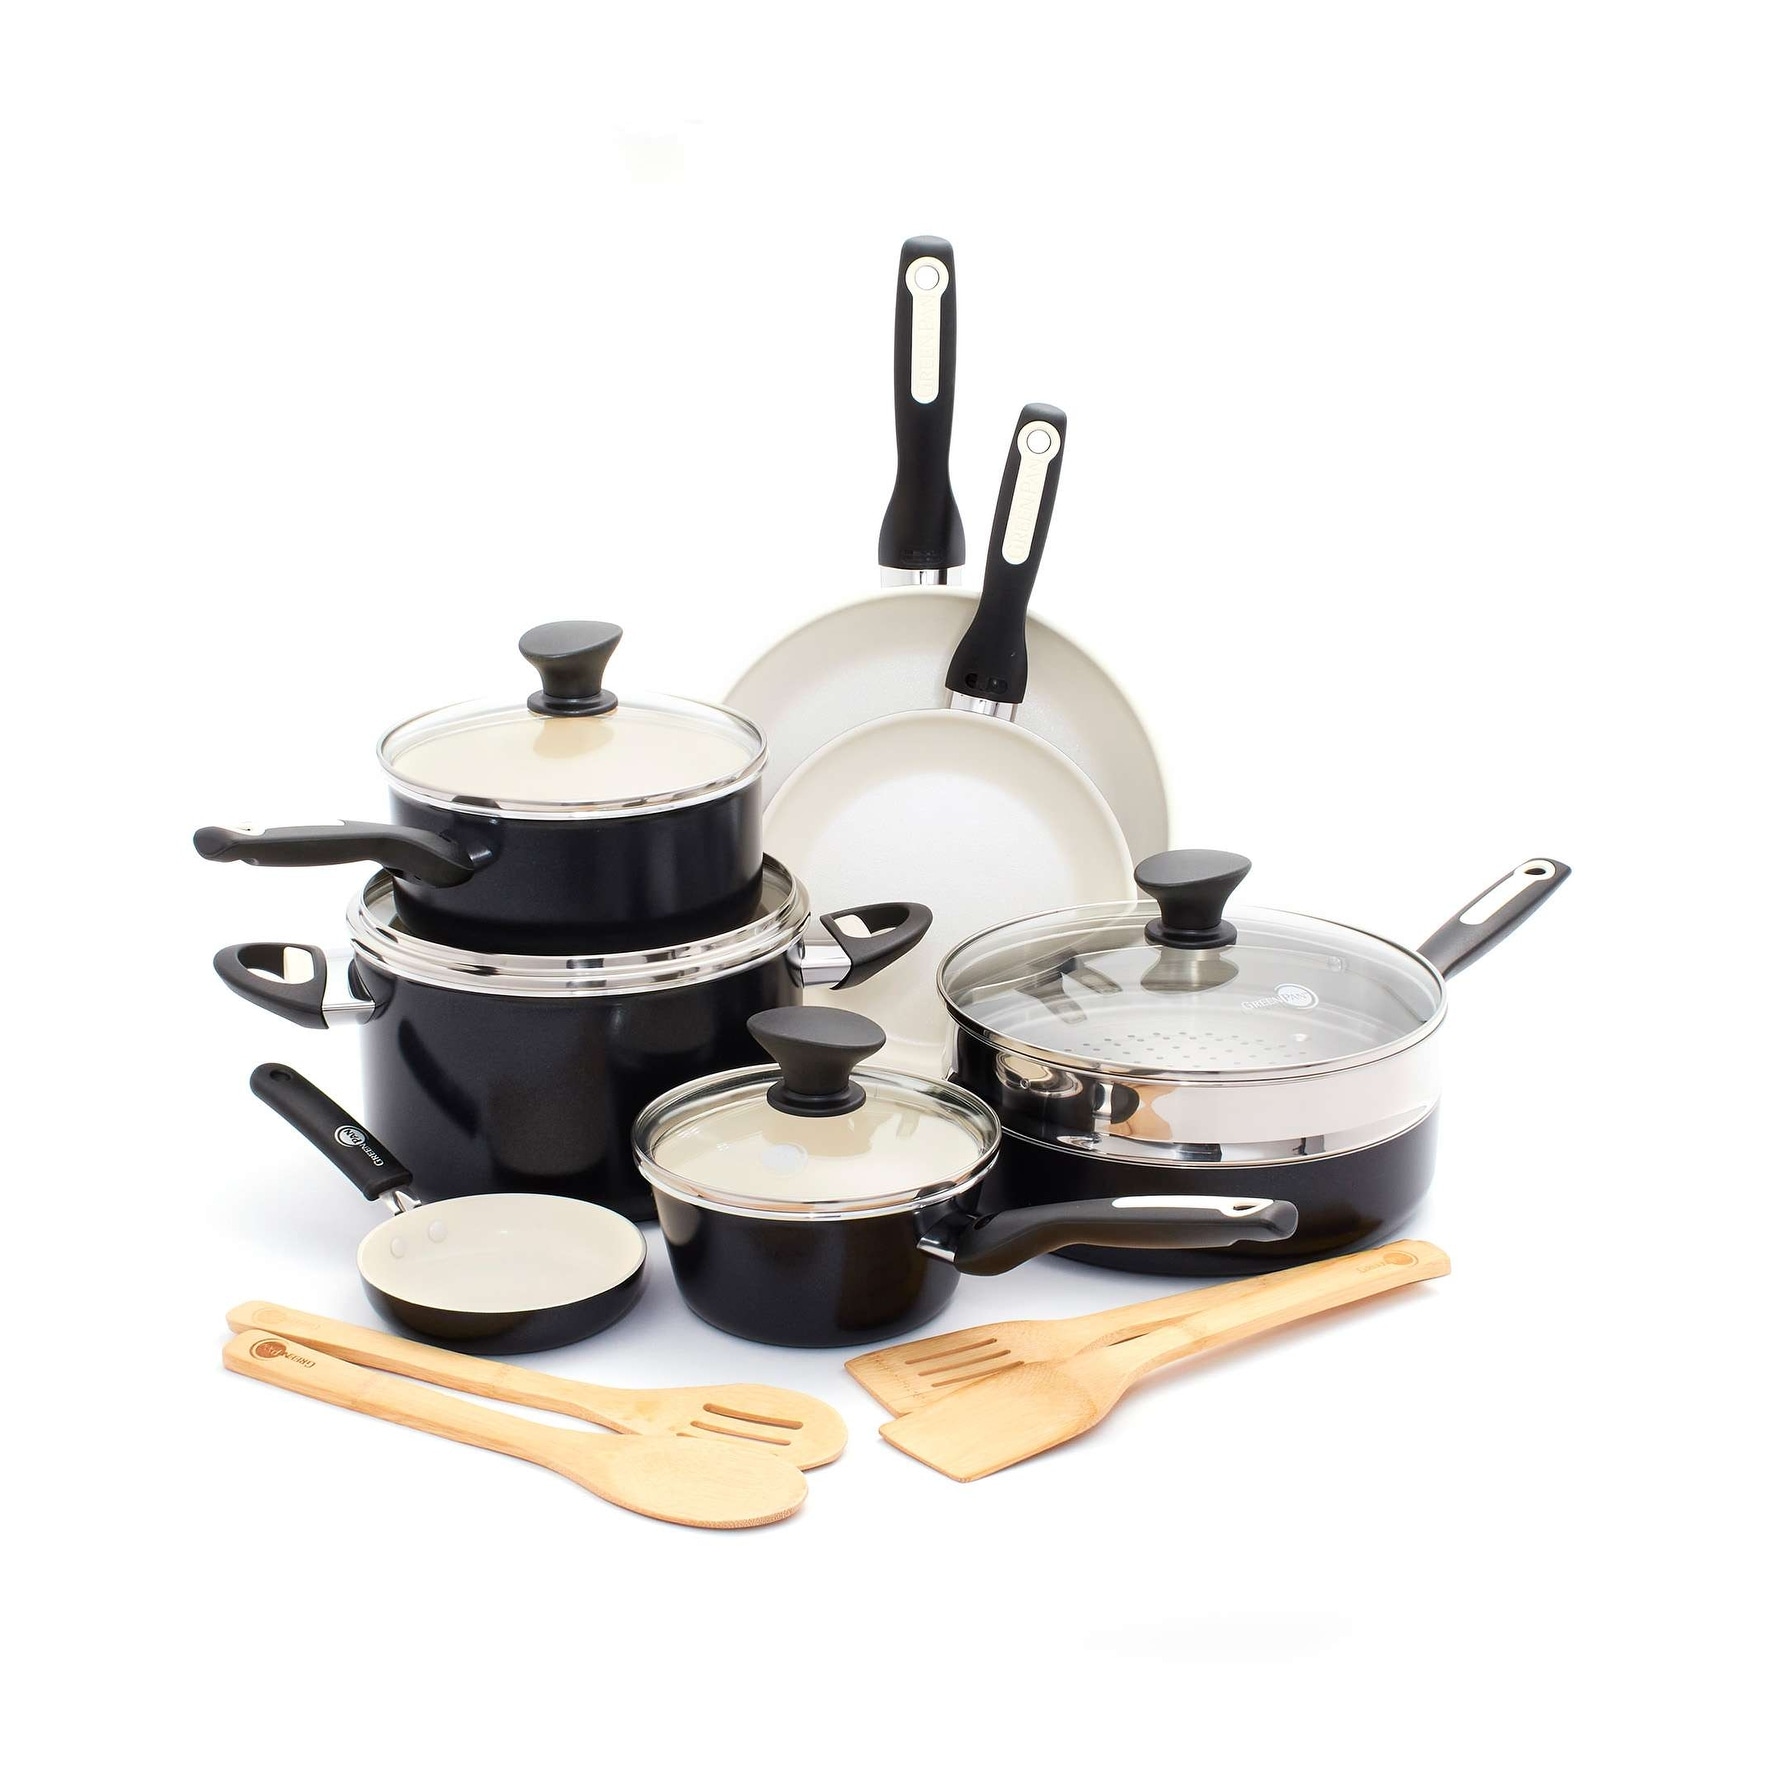 Black Friday Cuisinart cookware deal: Save 31% on pots and pans we